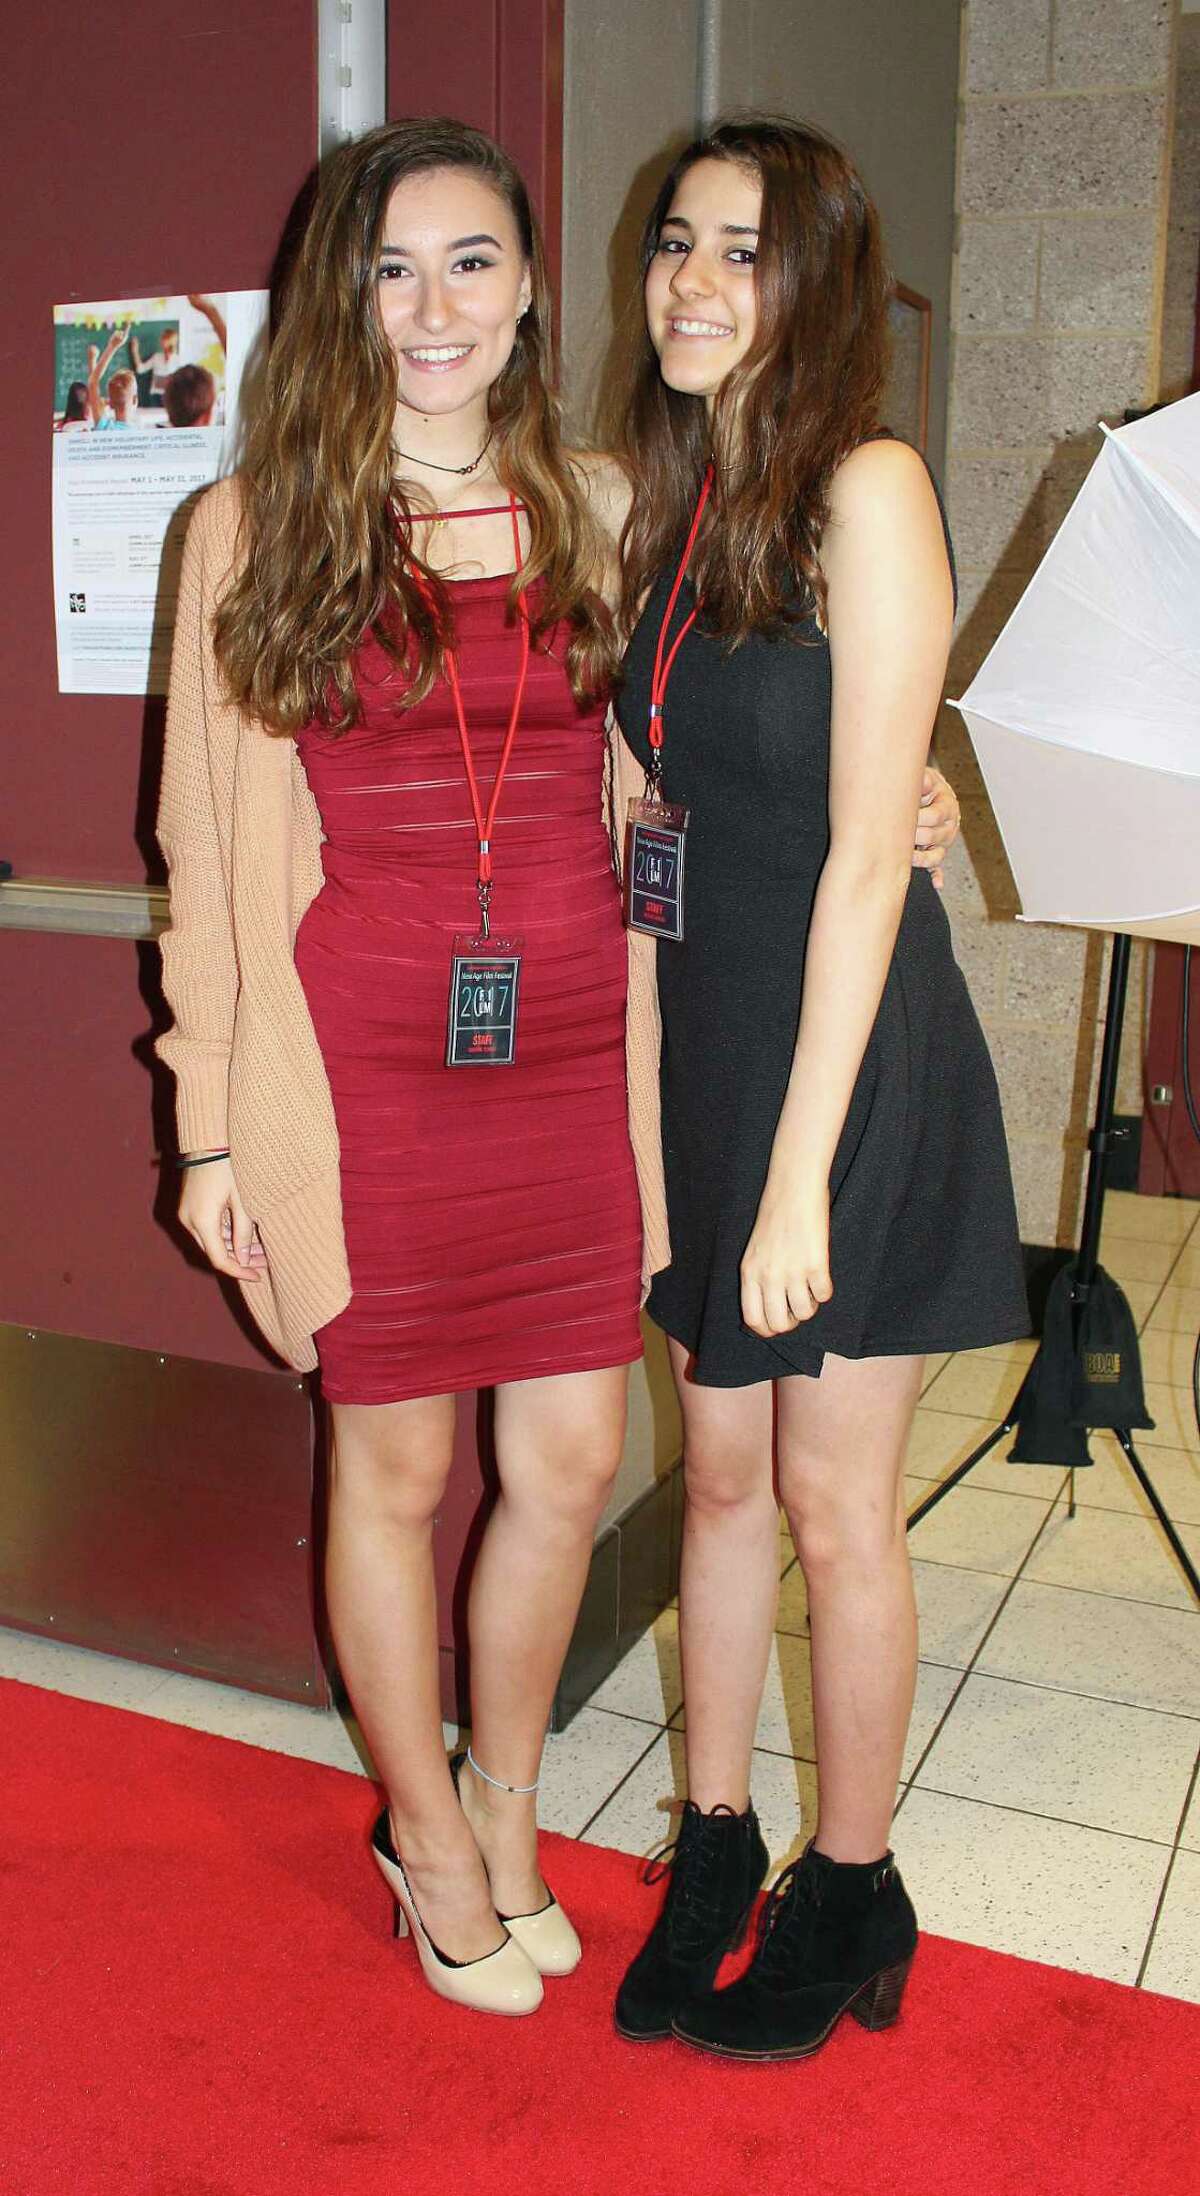 New Canaan High School sophomores Gwynne Tenney and Rachel Driver at the New Canaan High School Film Festival in New Canaan, CT on May 25, 2017.